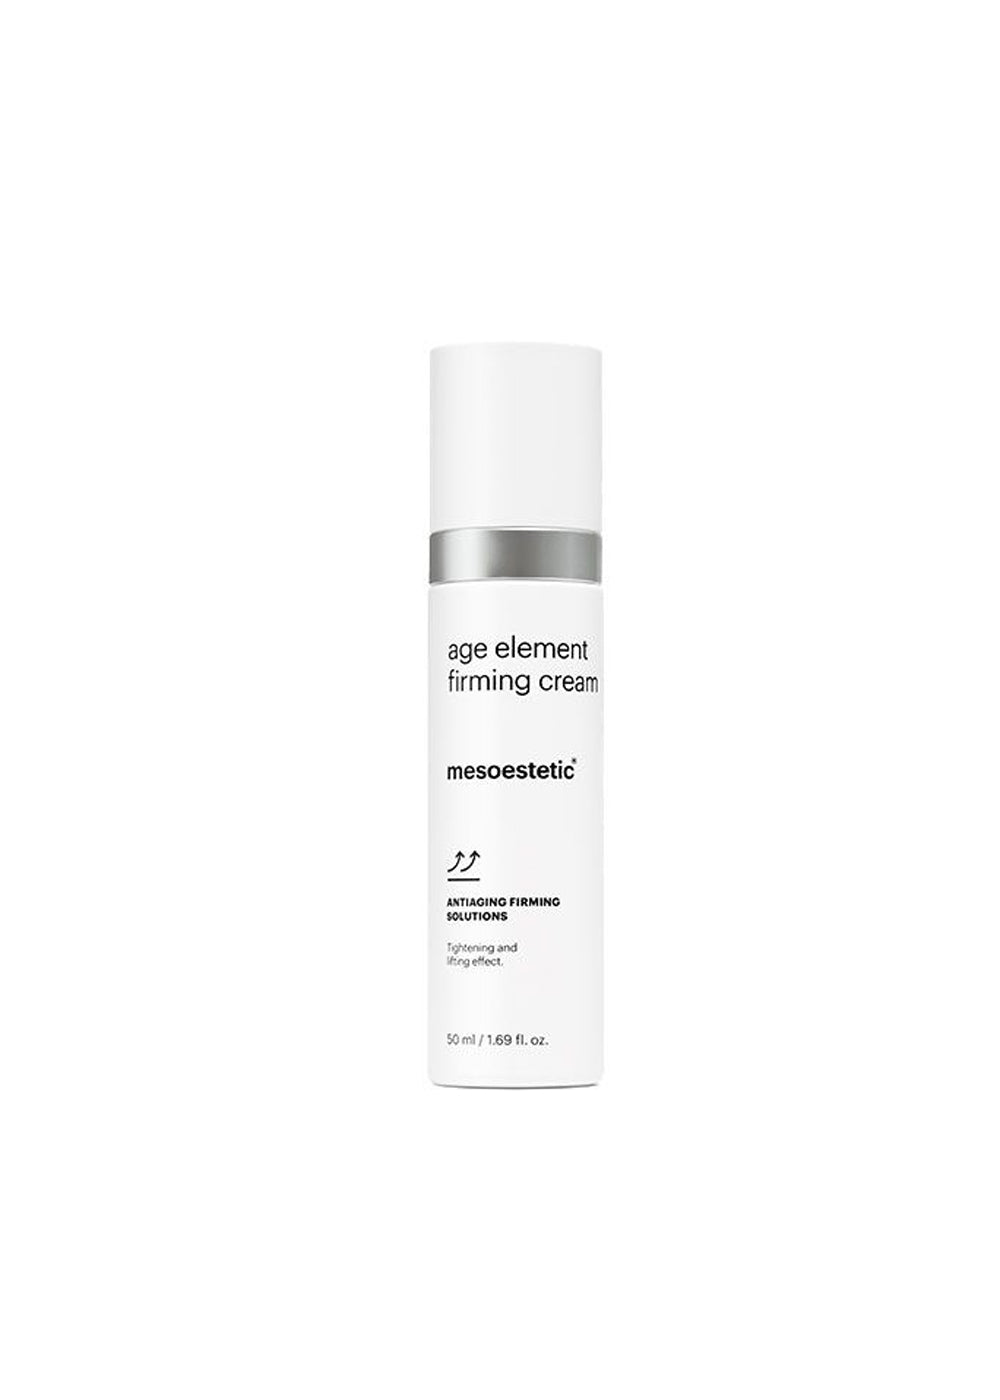 Mesoestetic age element® firming cream